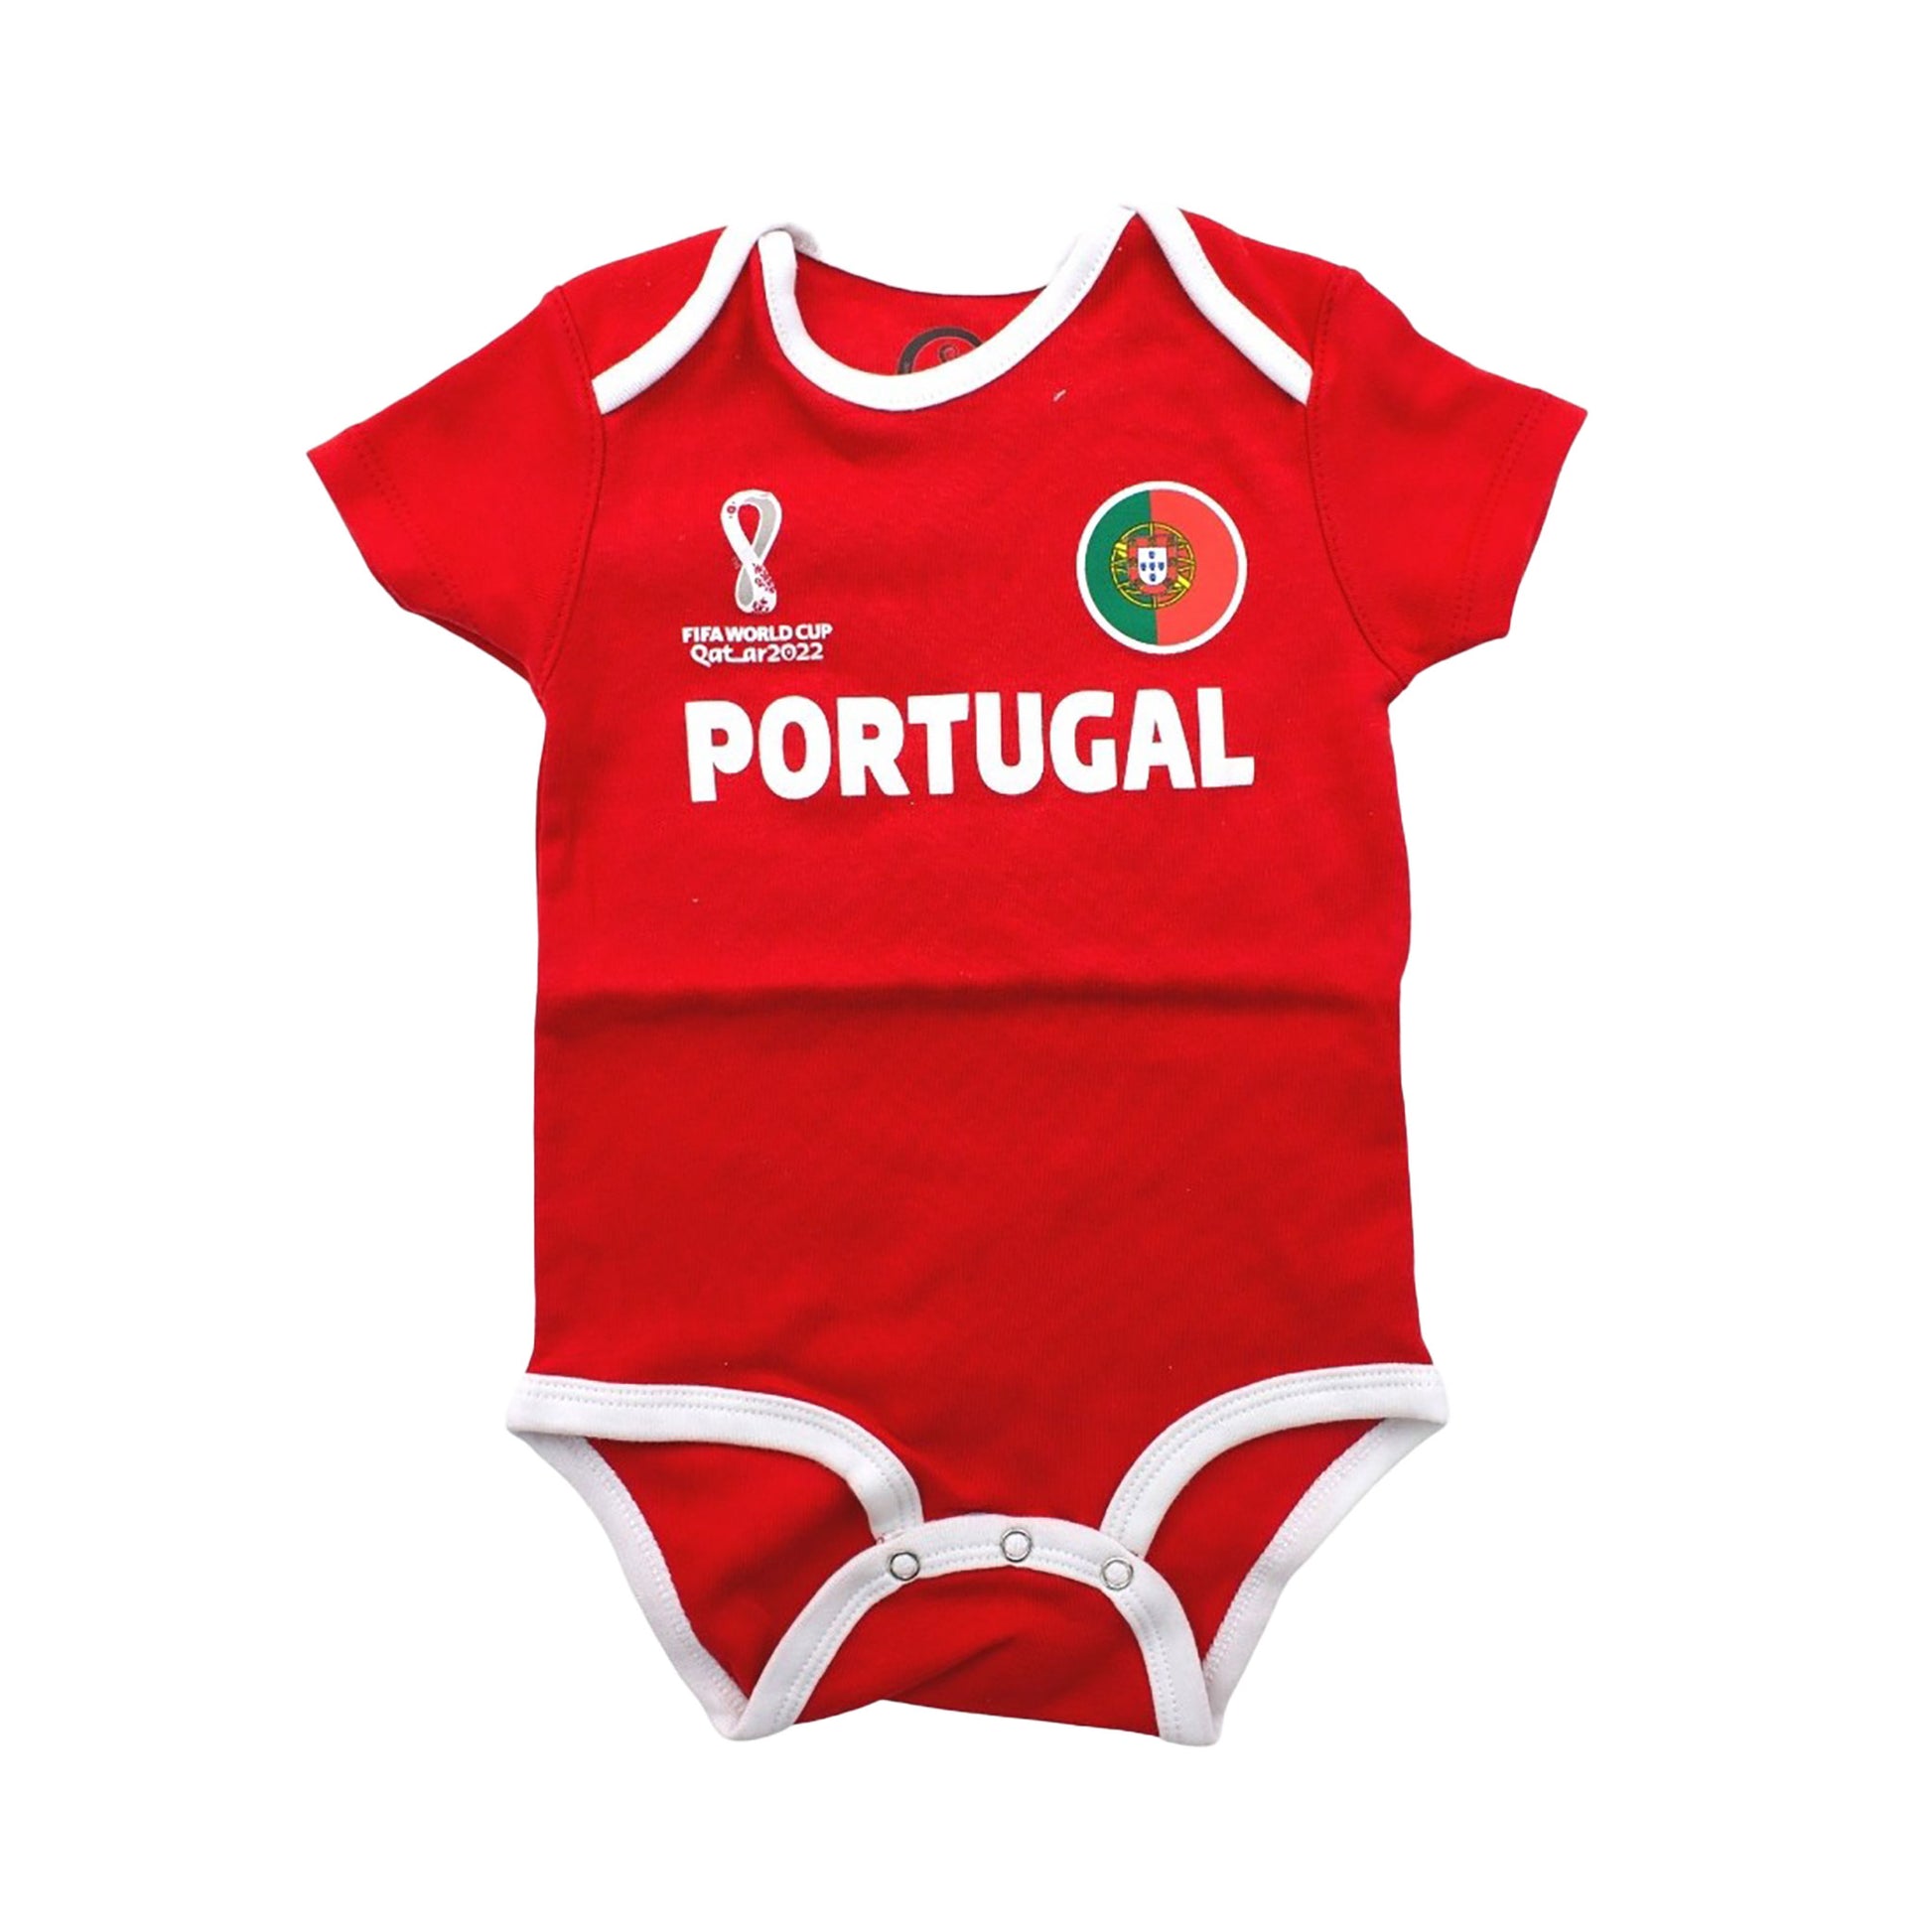 FIFA World Cup Qatar 2022 Portugal Infant Onesies - 3 Pack | EvangelistaSports.com | Canada's Premiere Soccer Store